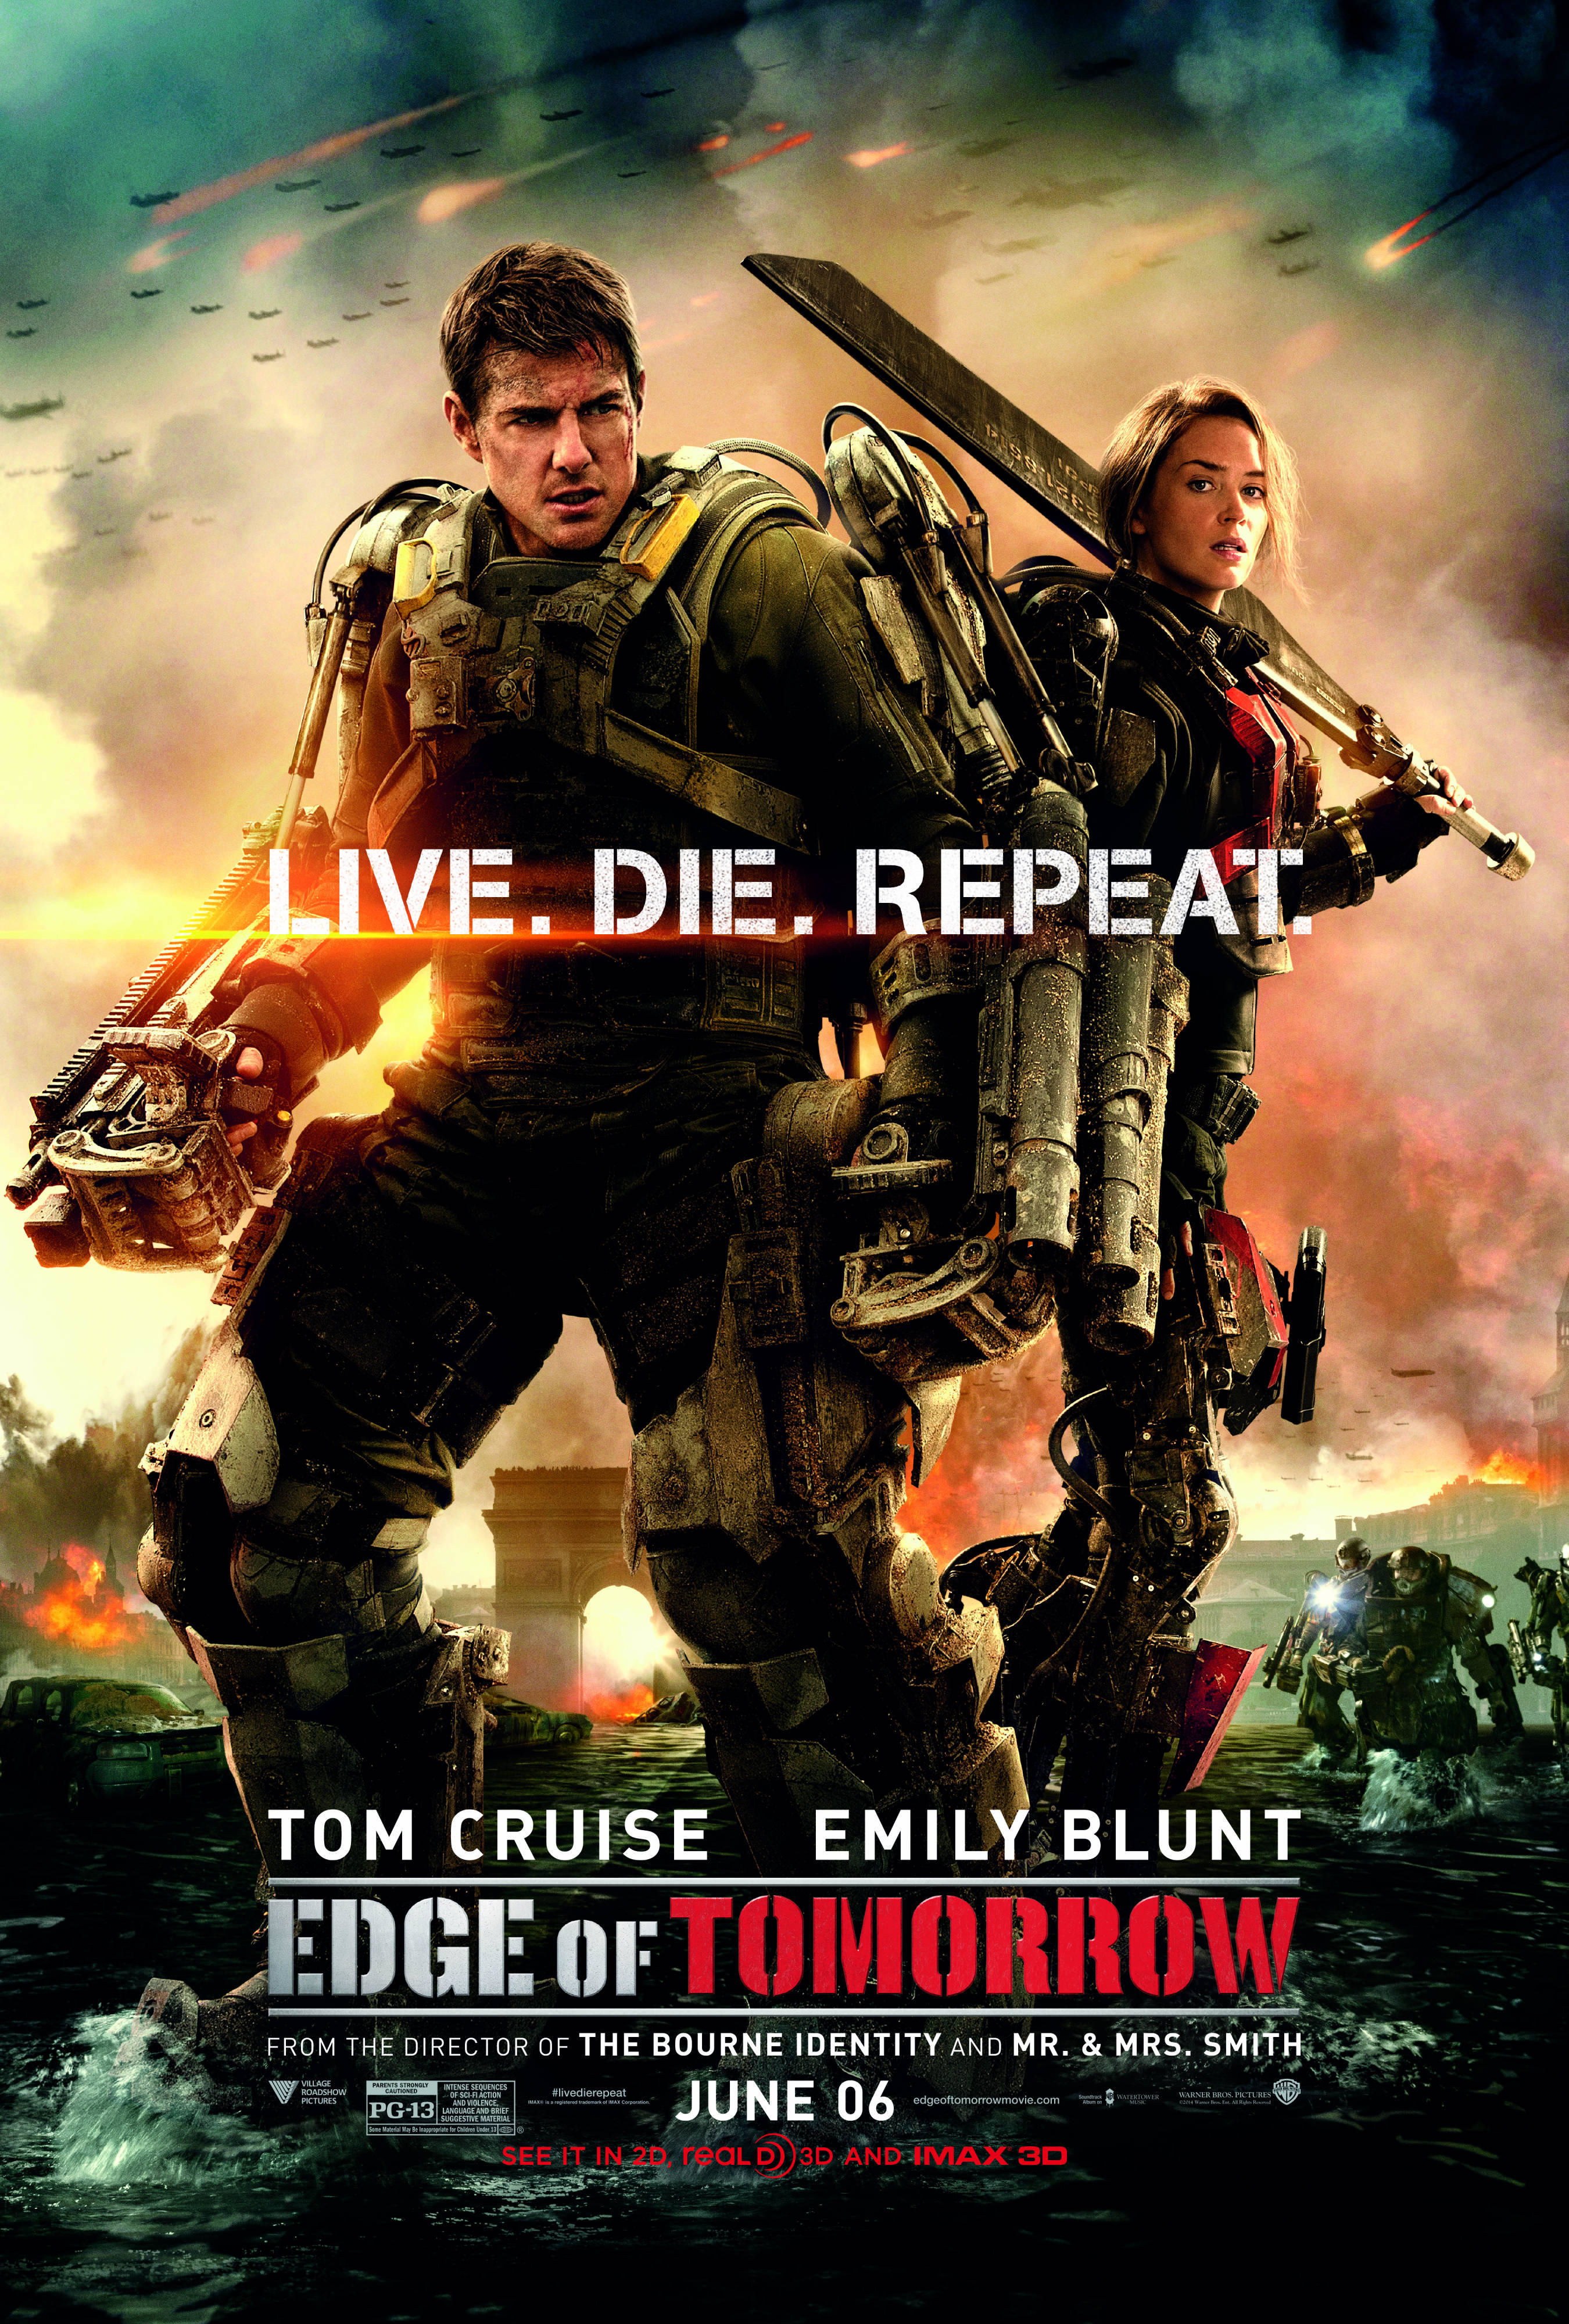 A poster showing Tom Cruise and Emily Blunt outfitted in futuristic military gear